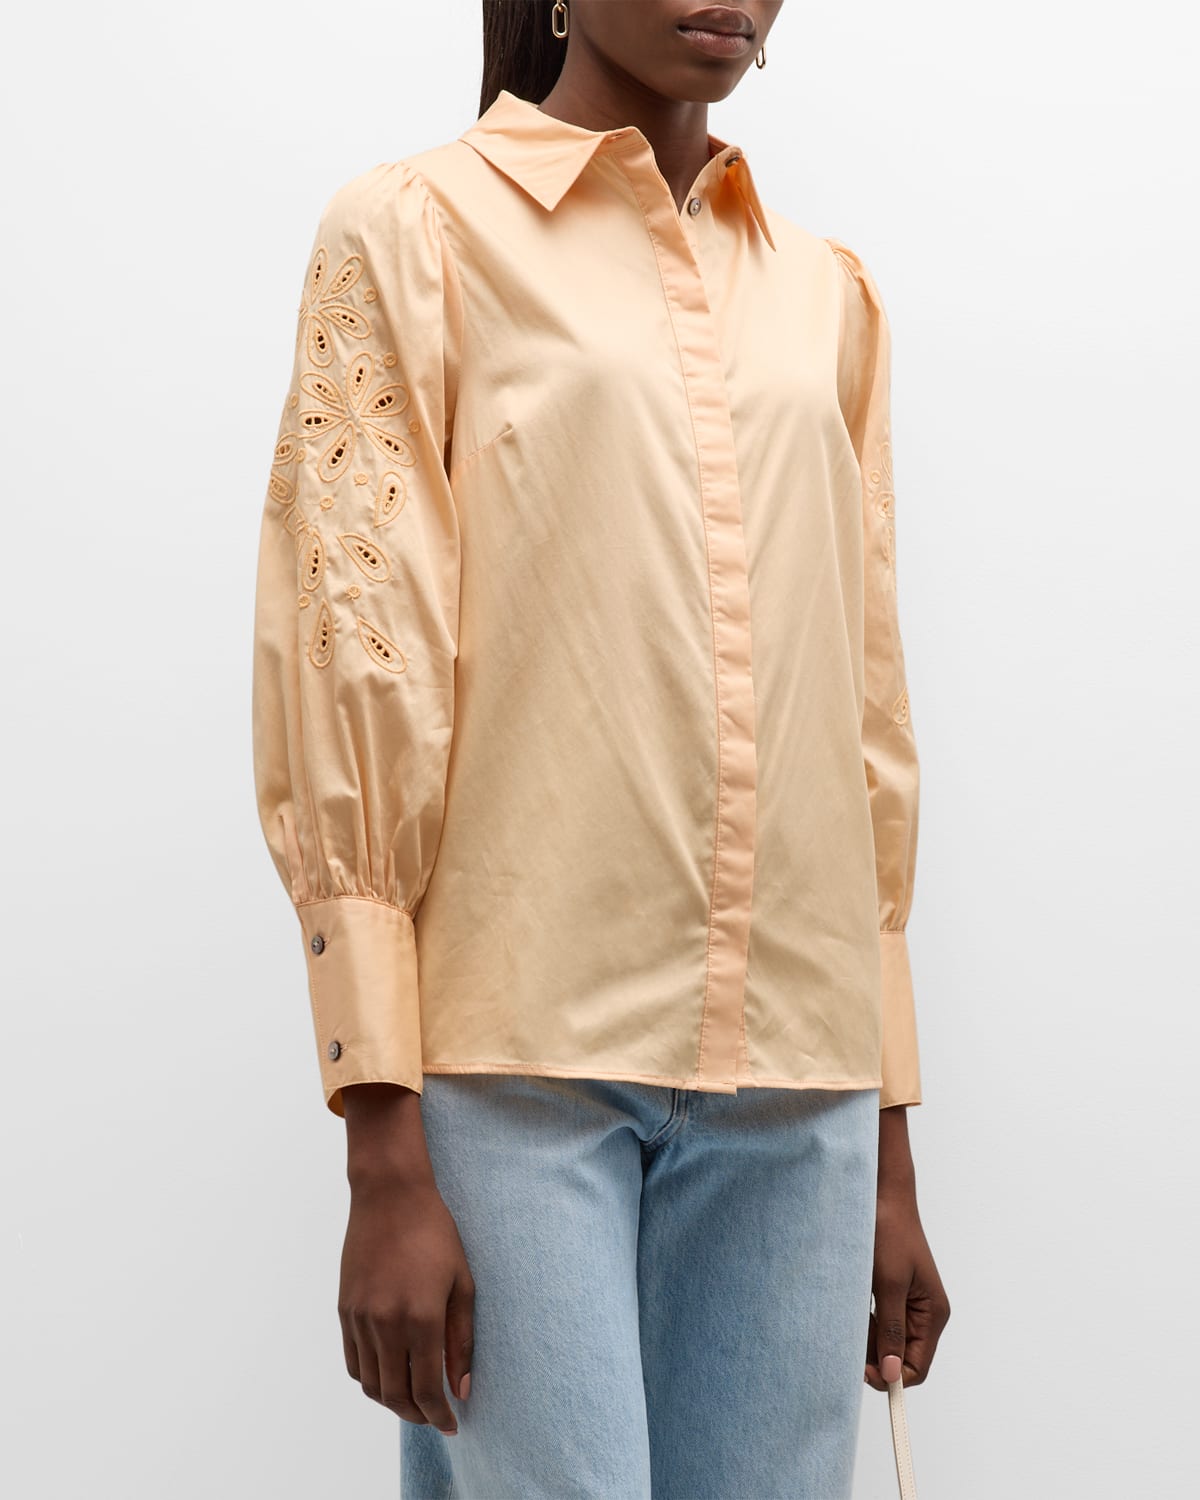 Harshman Devlin Eyelet Embroidered Cotton Shirt In Apricot Ice